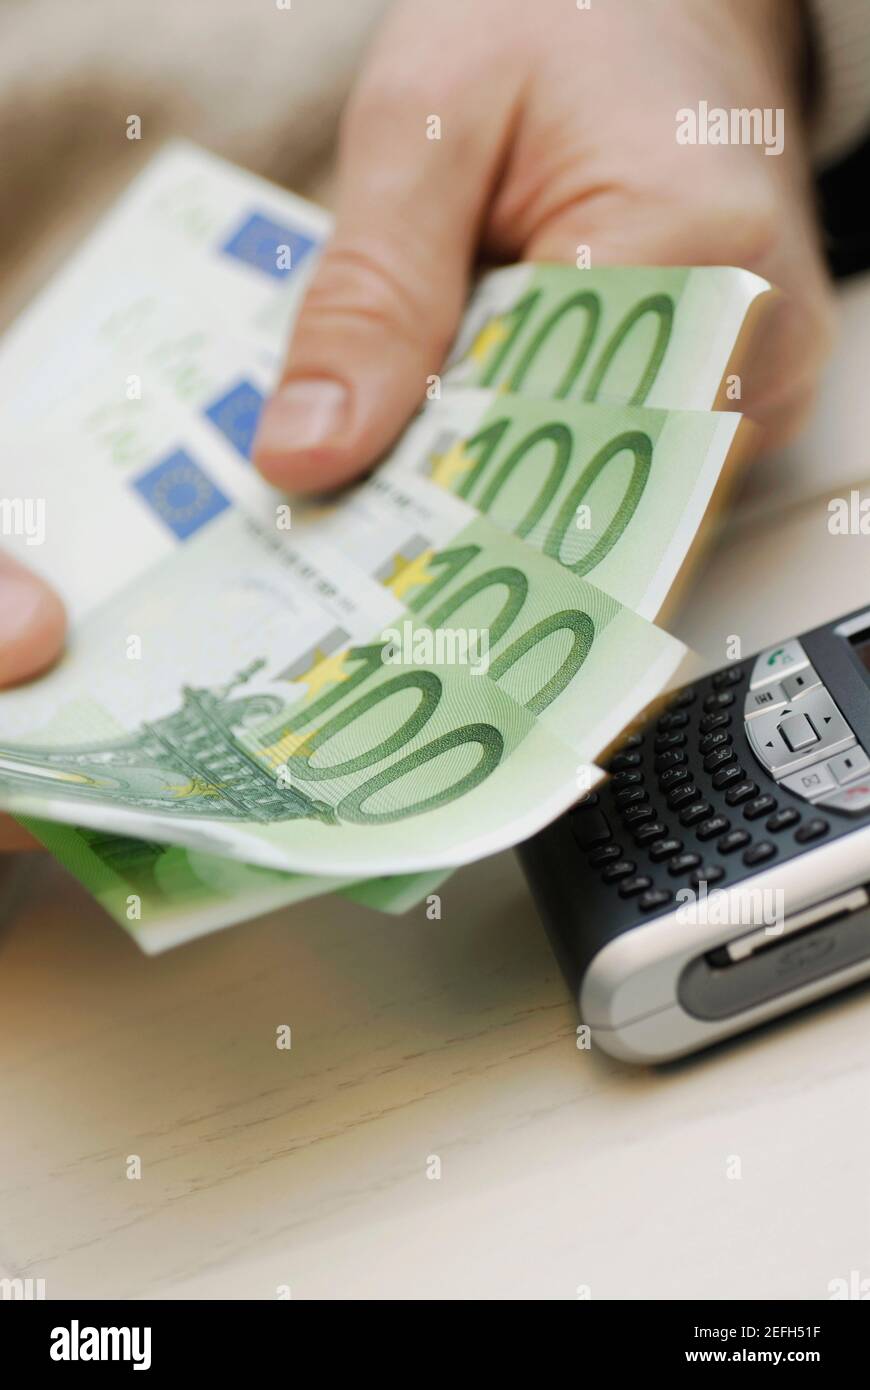 Close up of a personŽs hand counting one hundred Euro banknotes Stock Photo